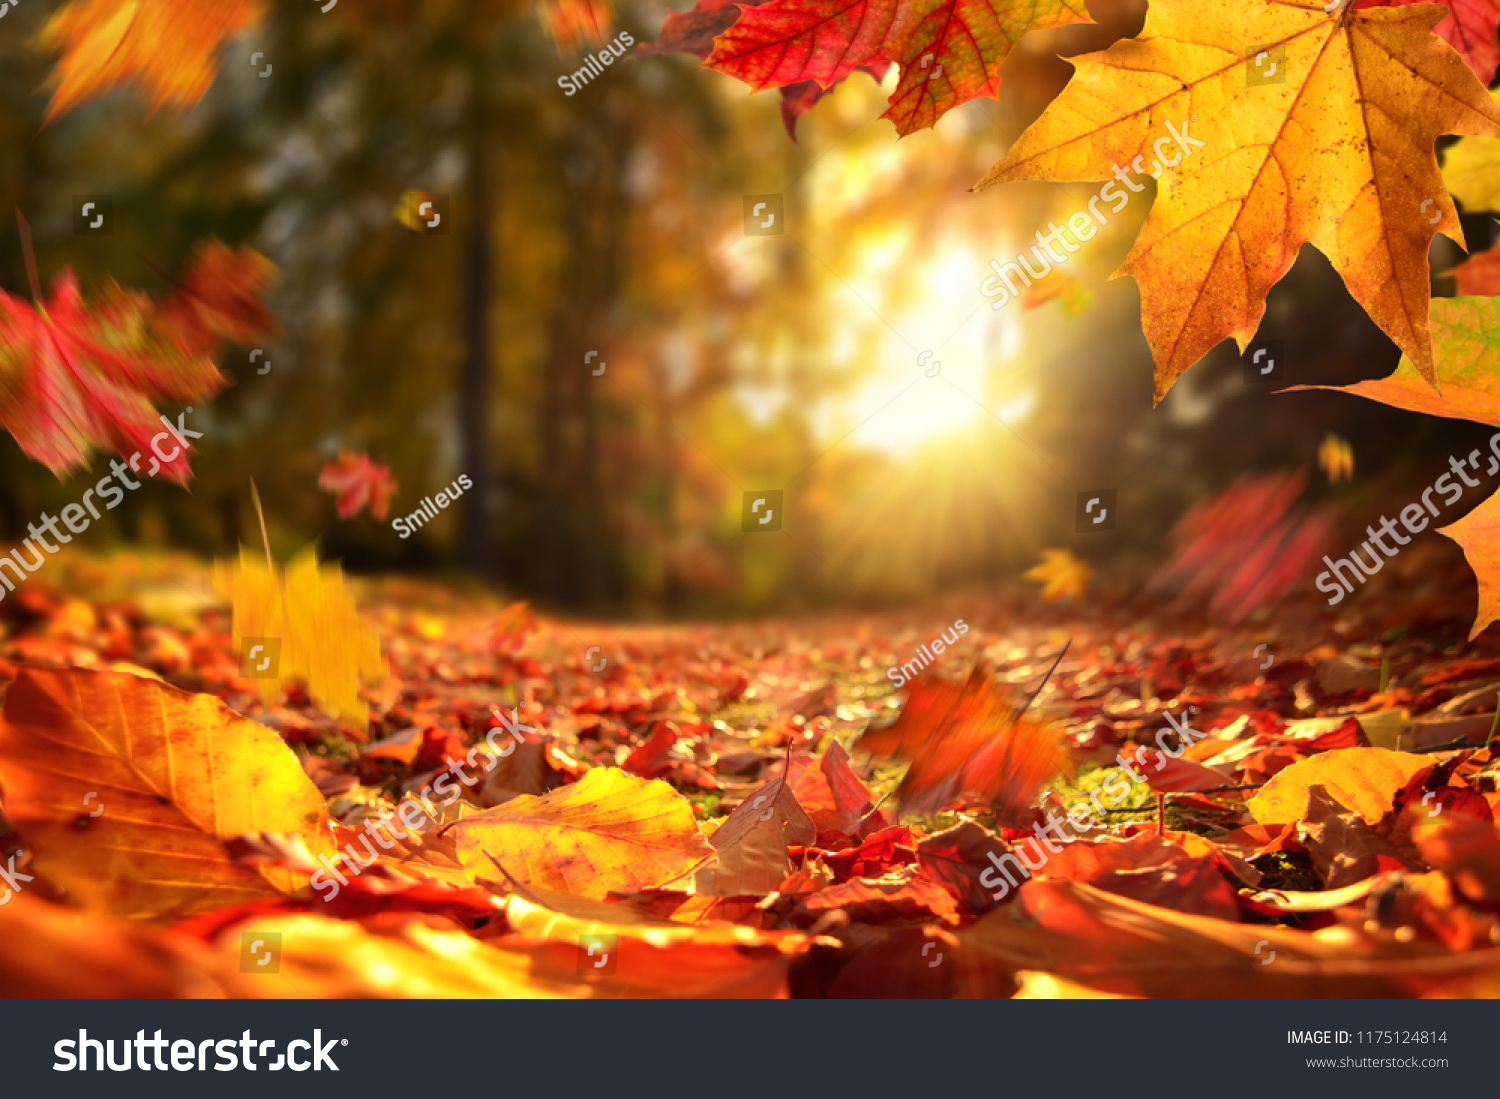 Lively closeup of falling autumn leaves with vibrant backlight from the setting sun #1175124814